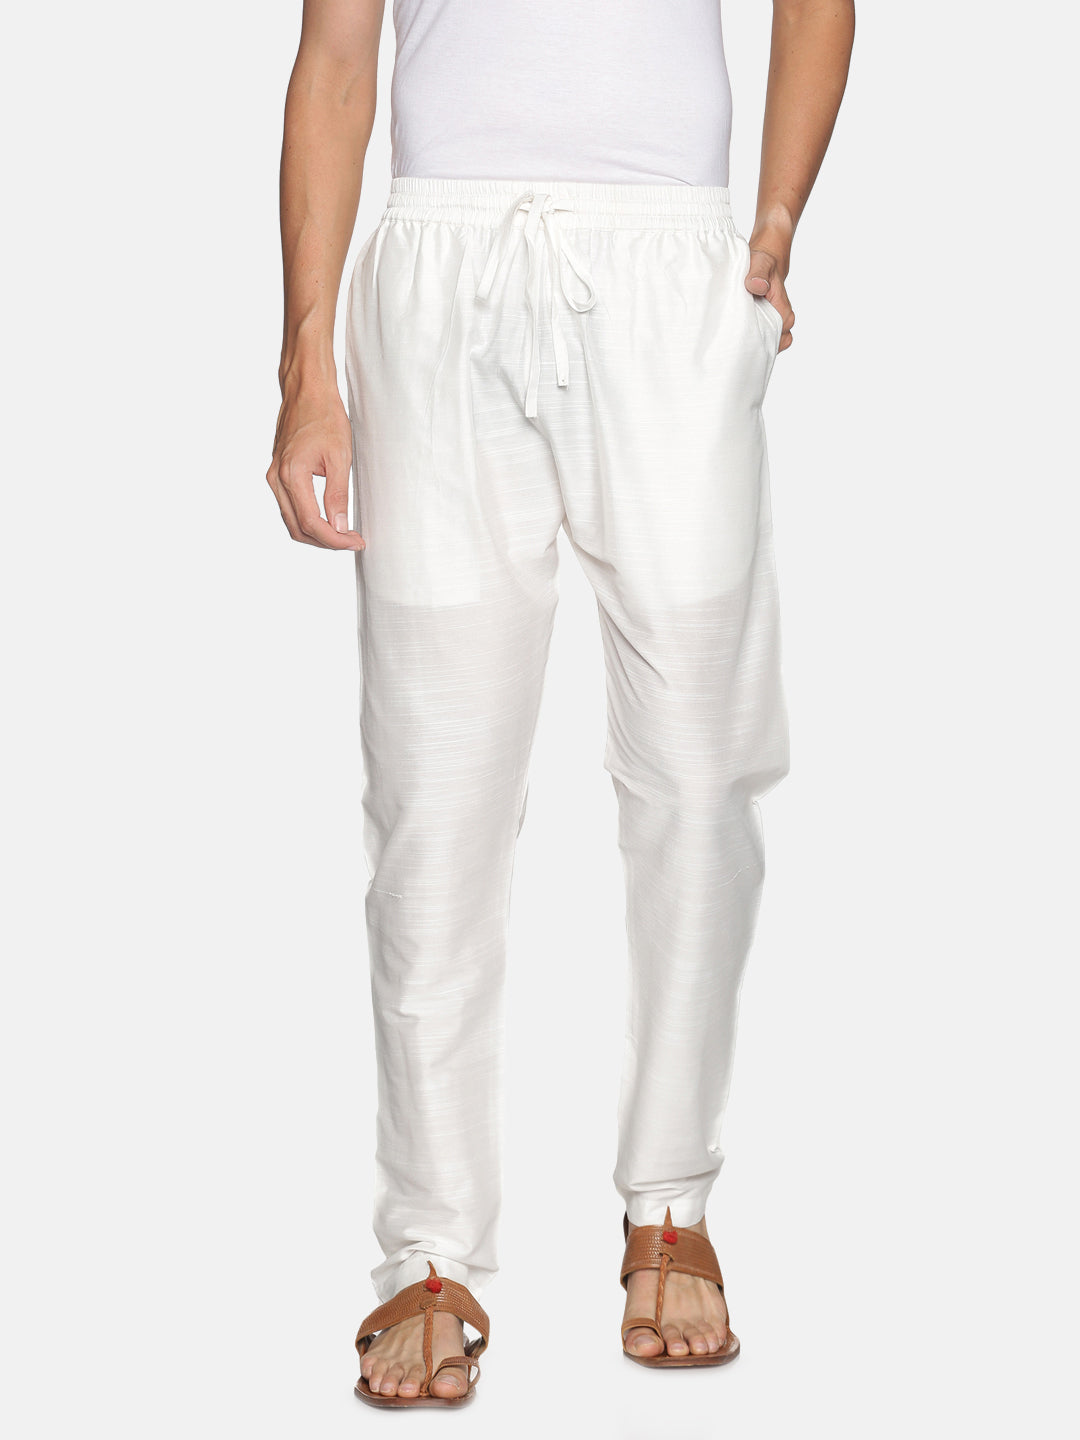 Pack of 2 White & Black Art Silk Trousers with Drawstring